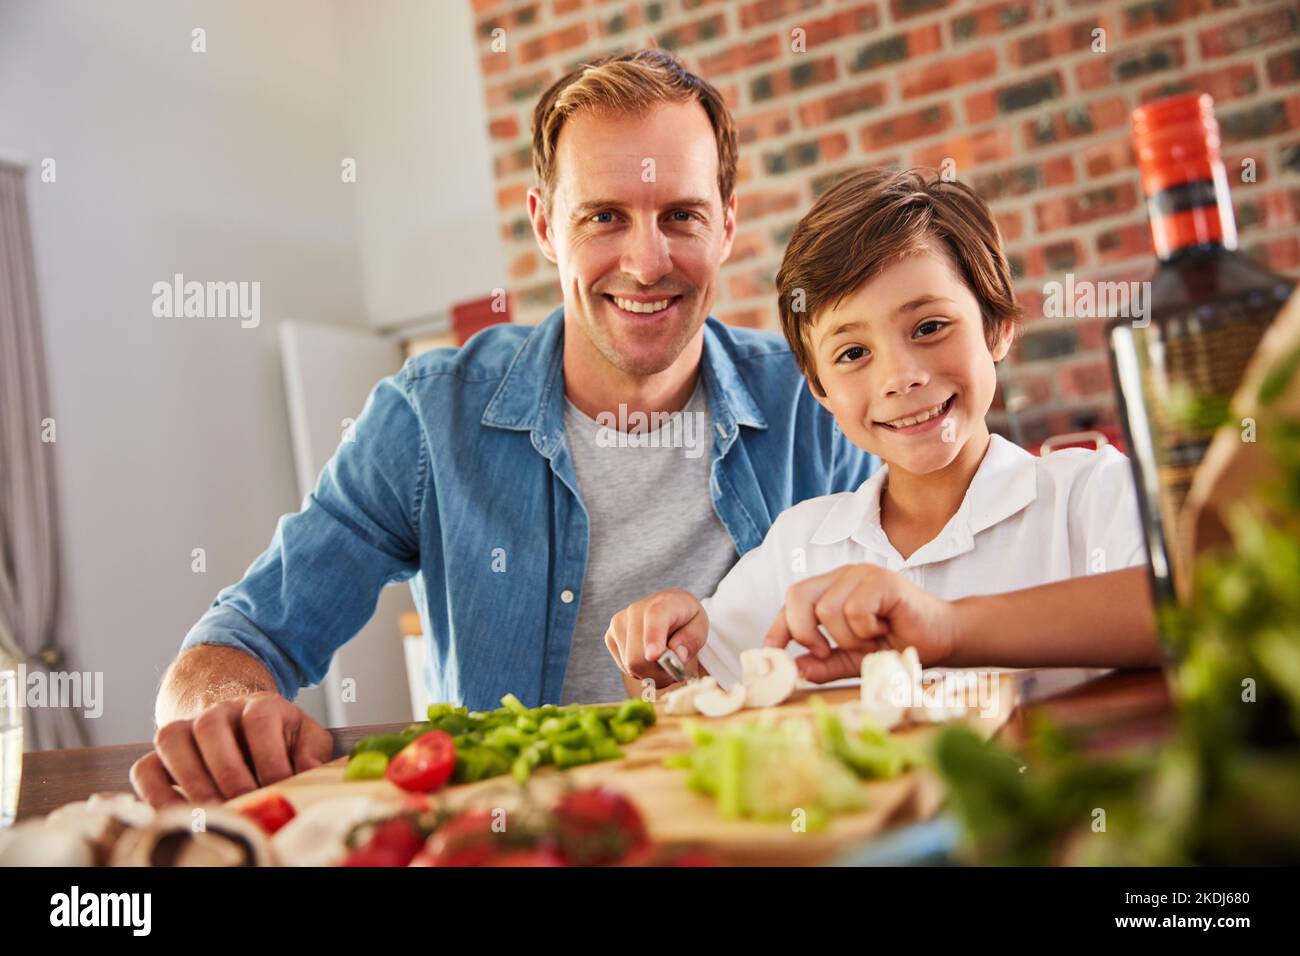 The love of cooking runs in our family. Portrait of a father and his little boy chopping vegetables in the kitchen. Stock Photo